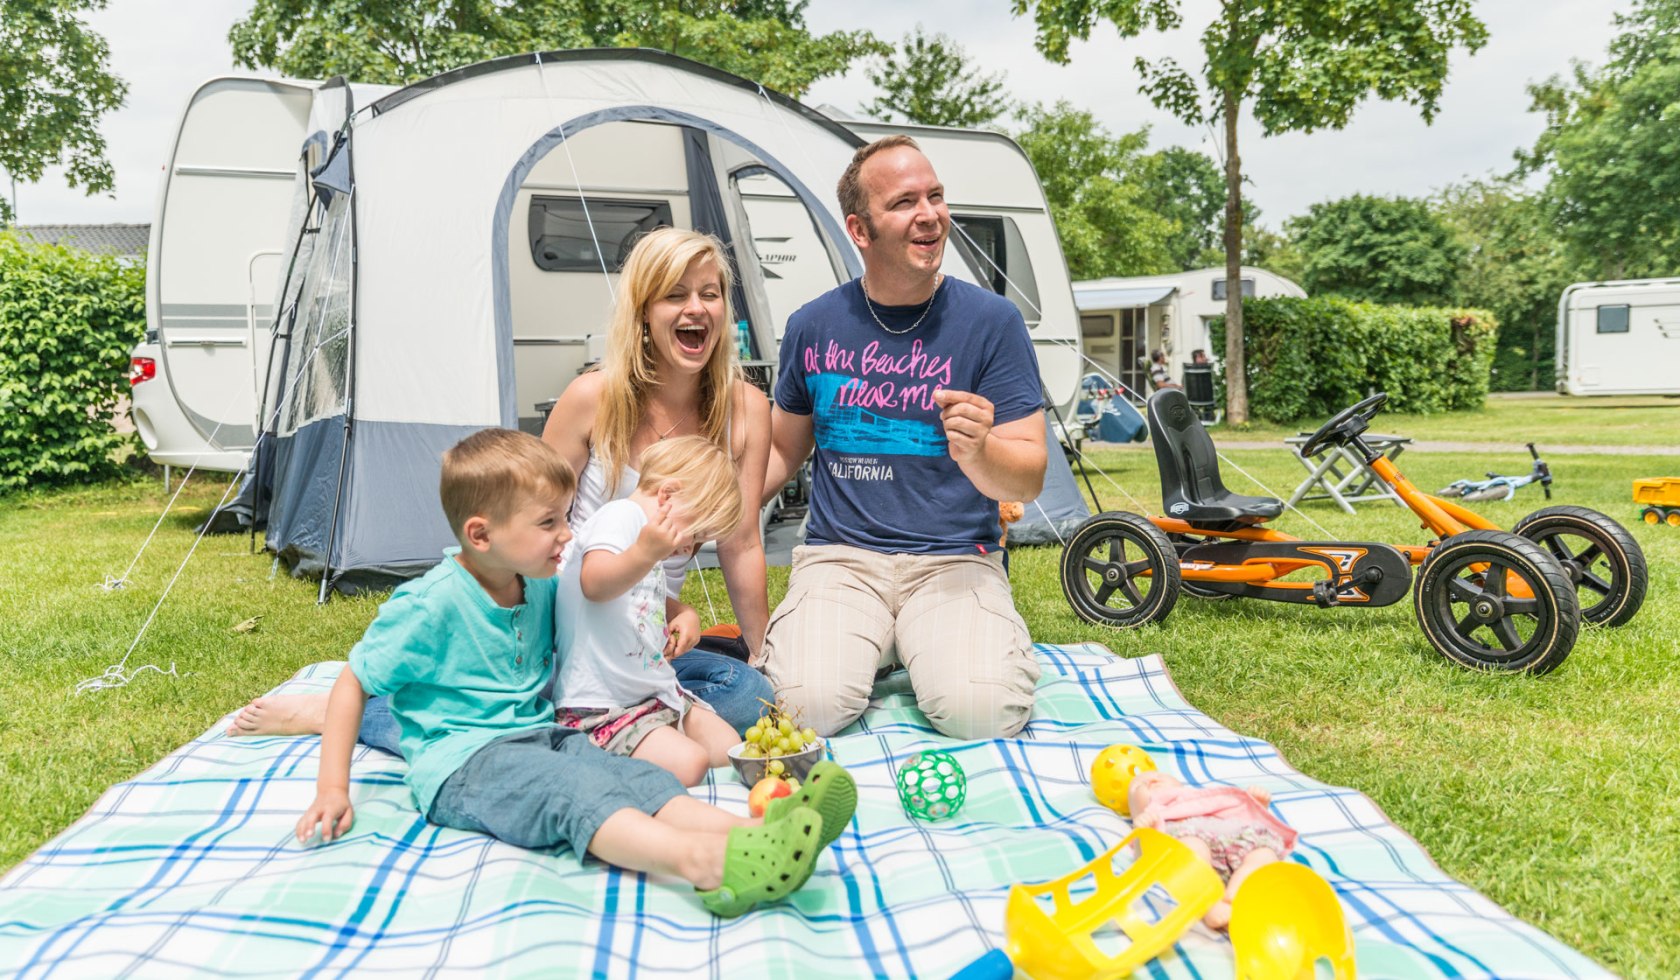 Family at the campsite, © Alfsee GmbH/ Danny Rothe